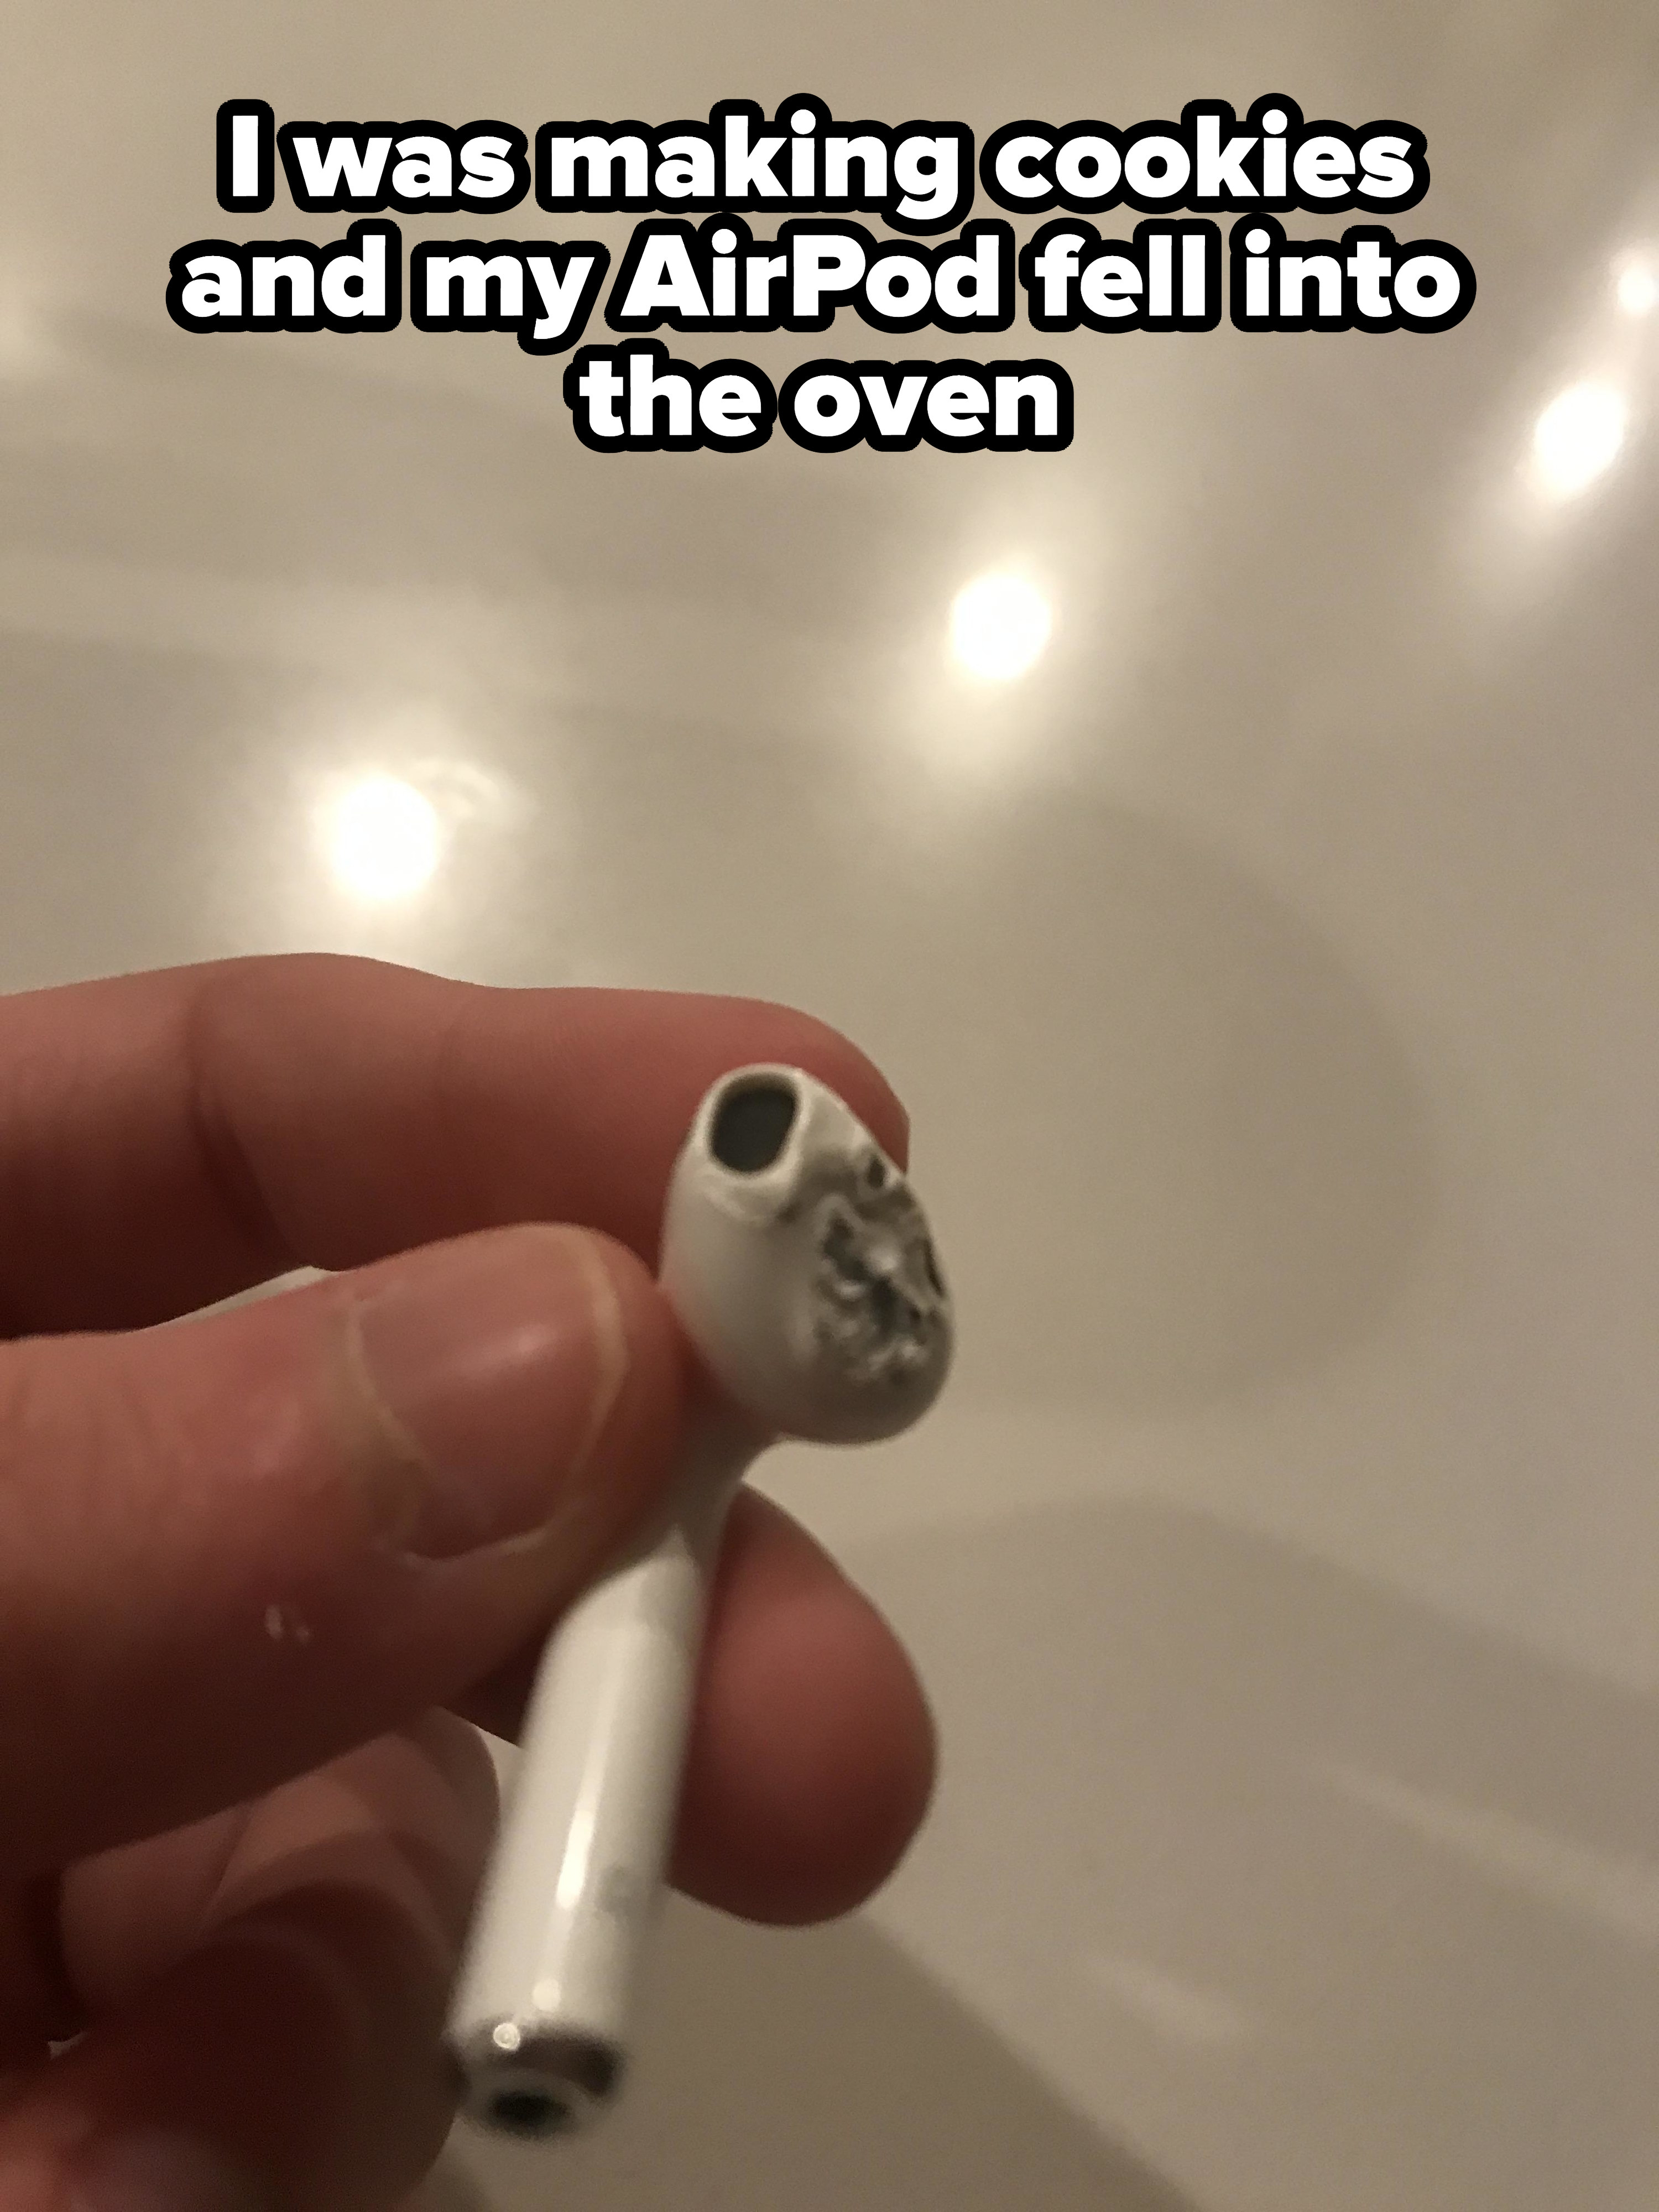 Melted AirPod that fell in the oven